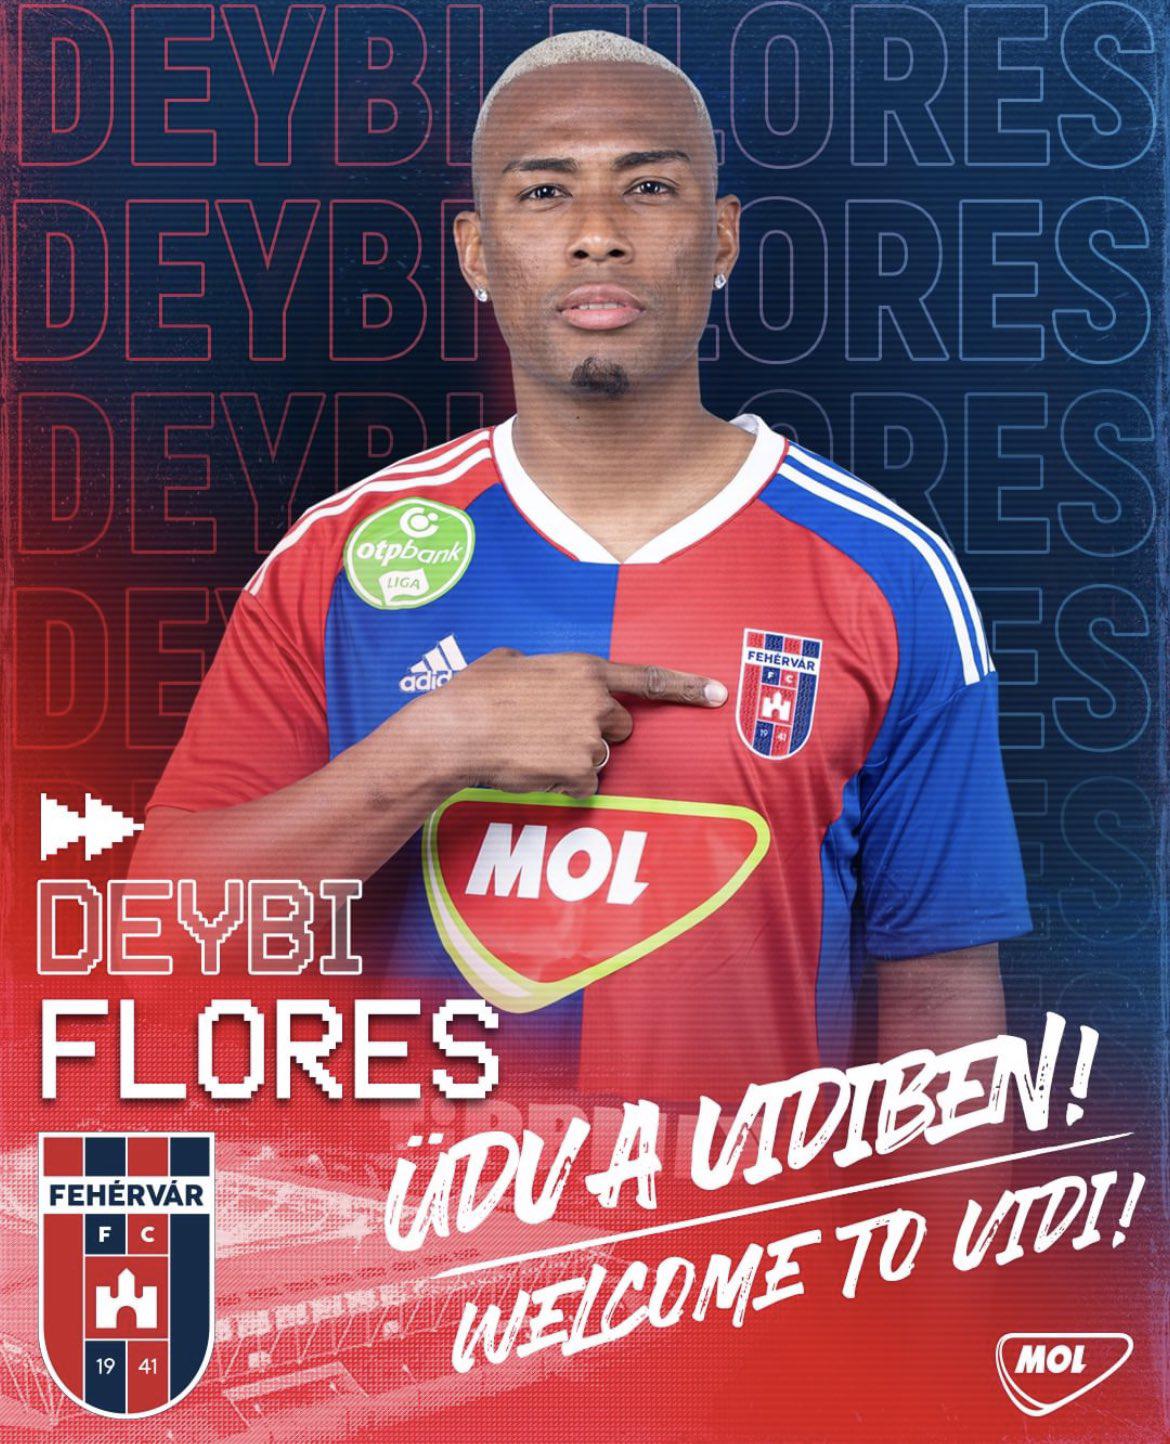 This is how Fehérvár announced the signing of Honduran Deiby Flores.